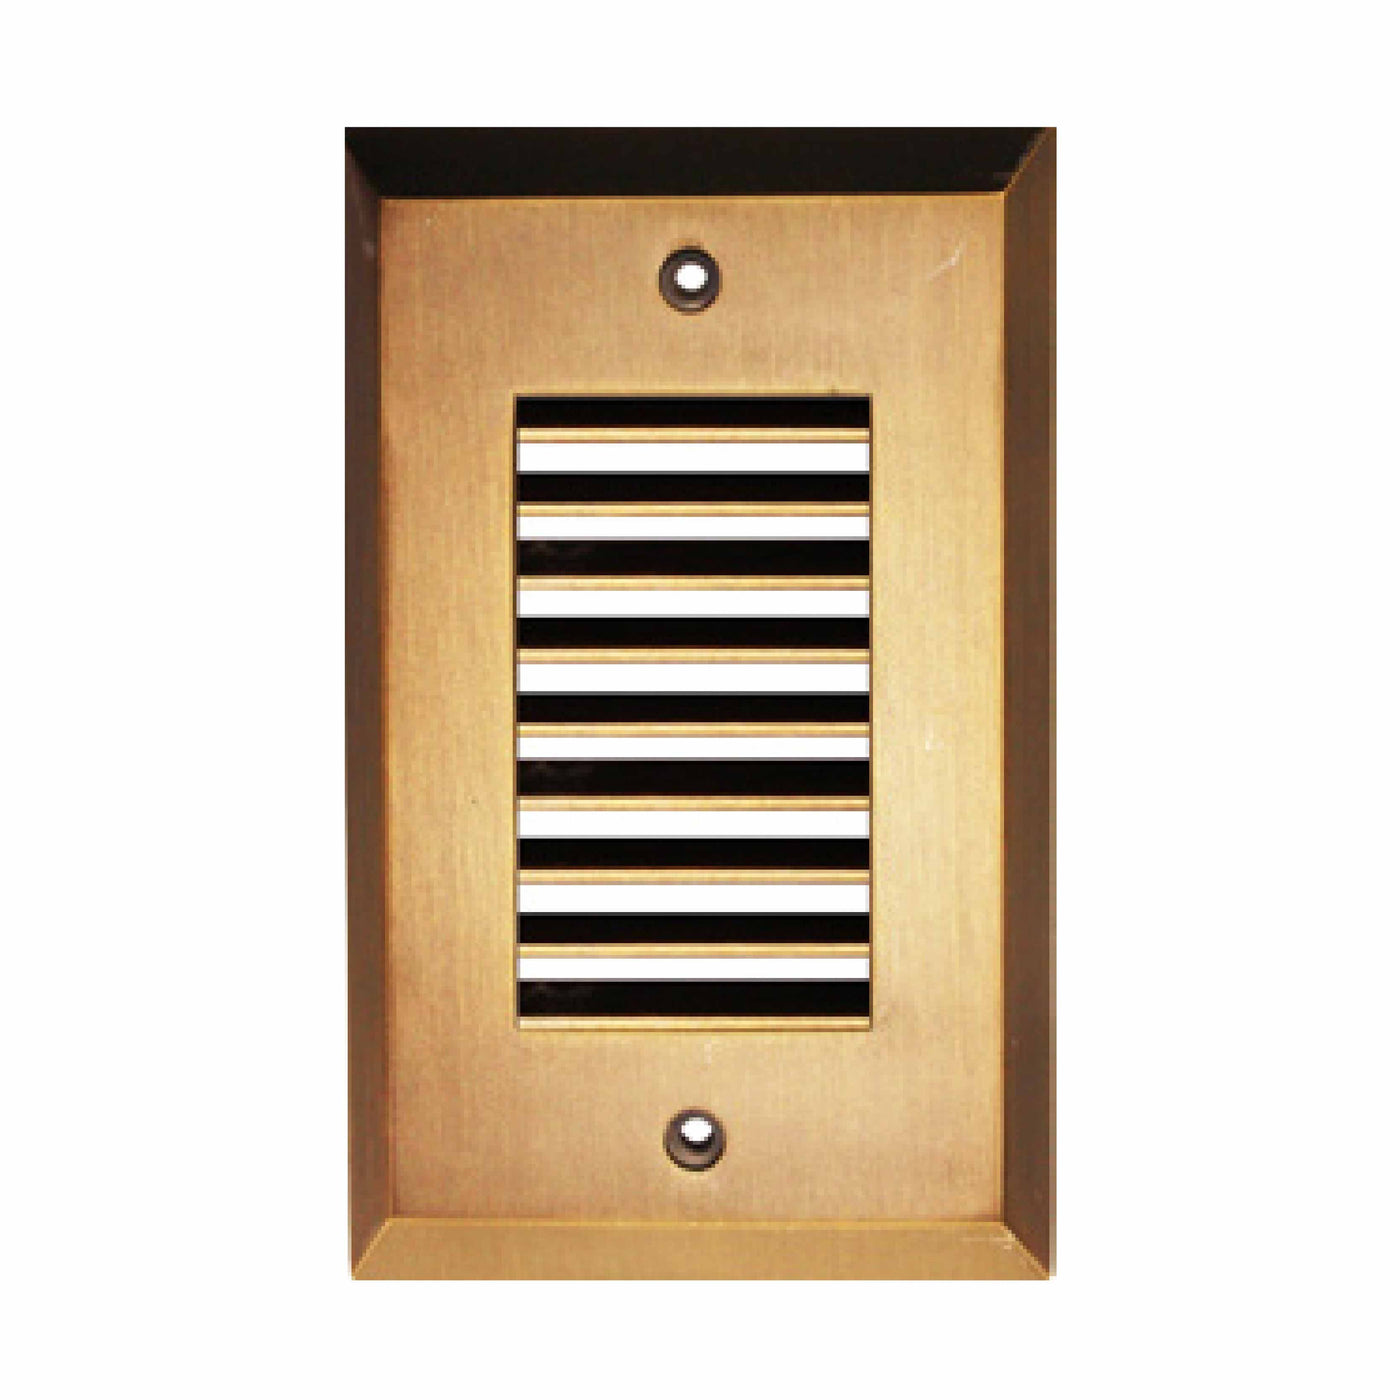 Westgate Step Light, 118 Lumens, 3W, 12V, Oiled Rubber Bronze, Brushed Nickel, White, or Antique Bronze Finish multiple Covers Available